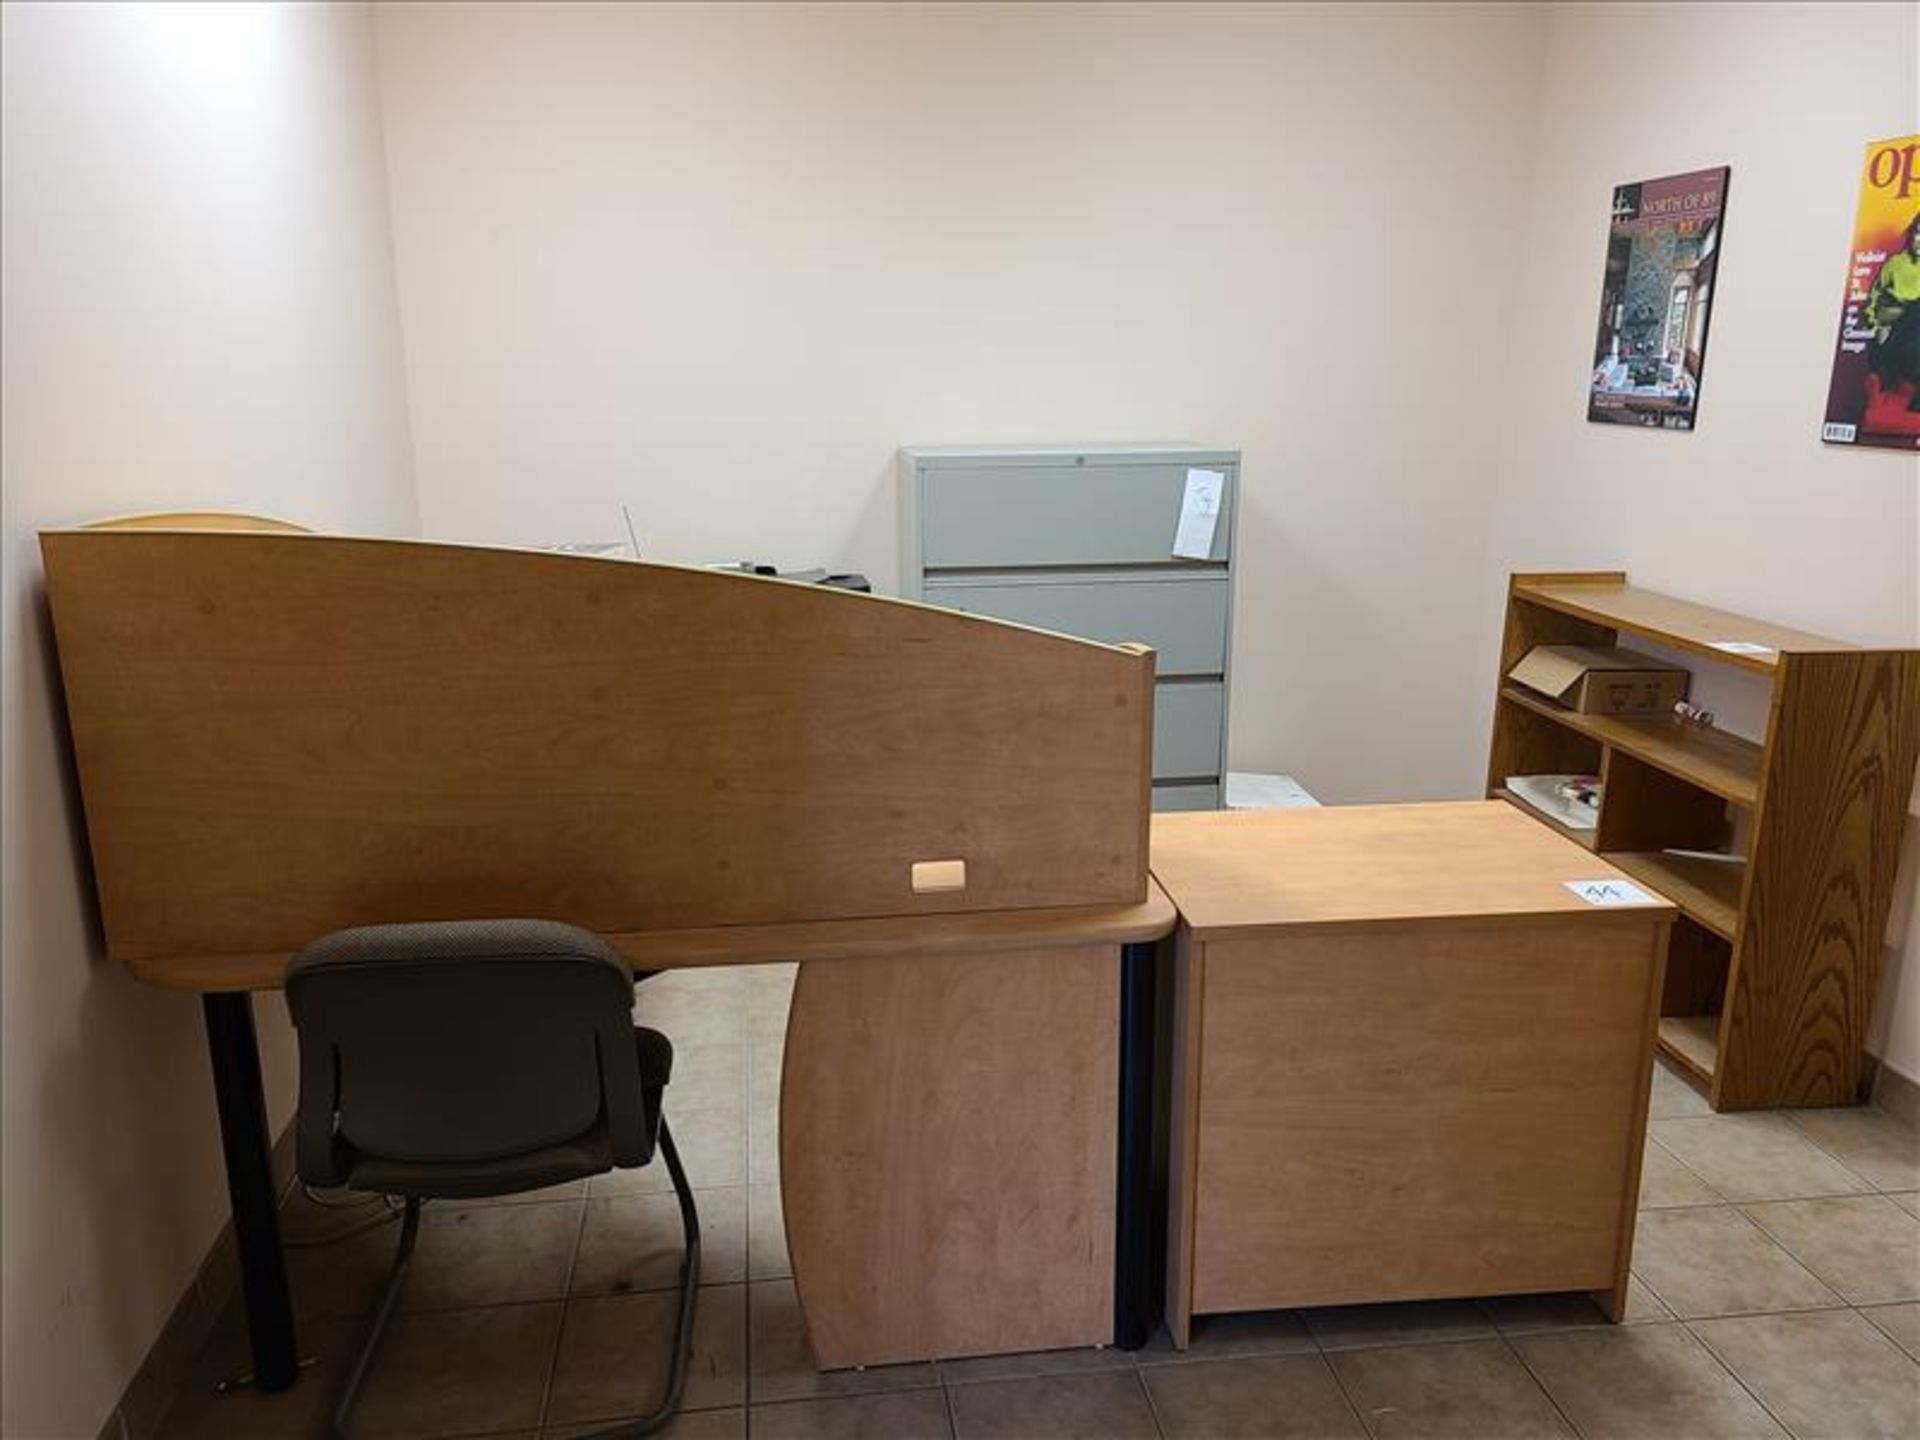 Office Furniture (Filing Cabinet not Included)